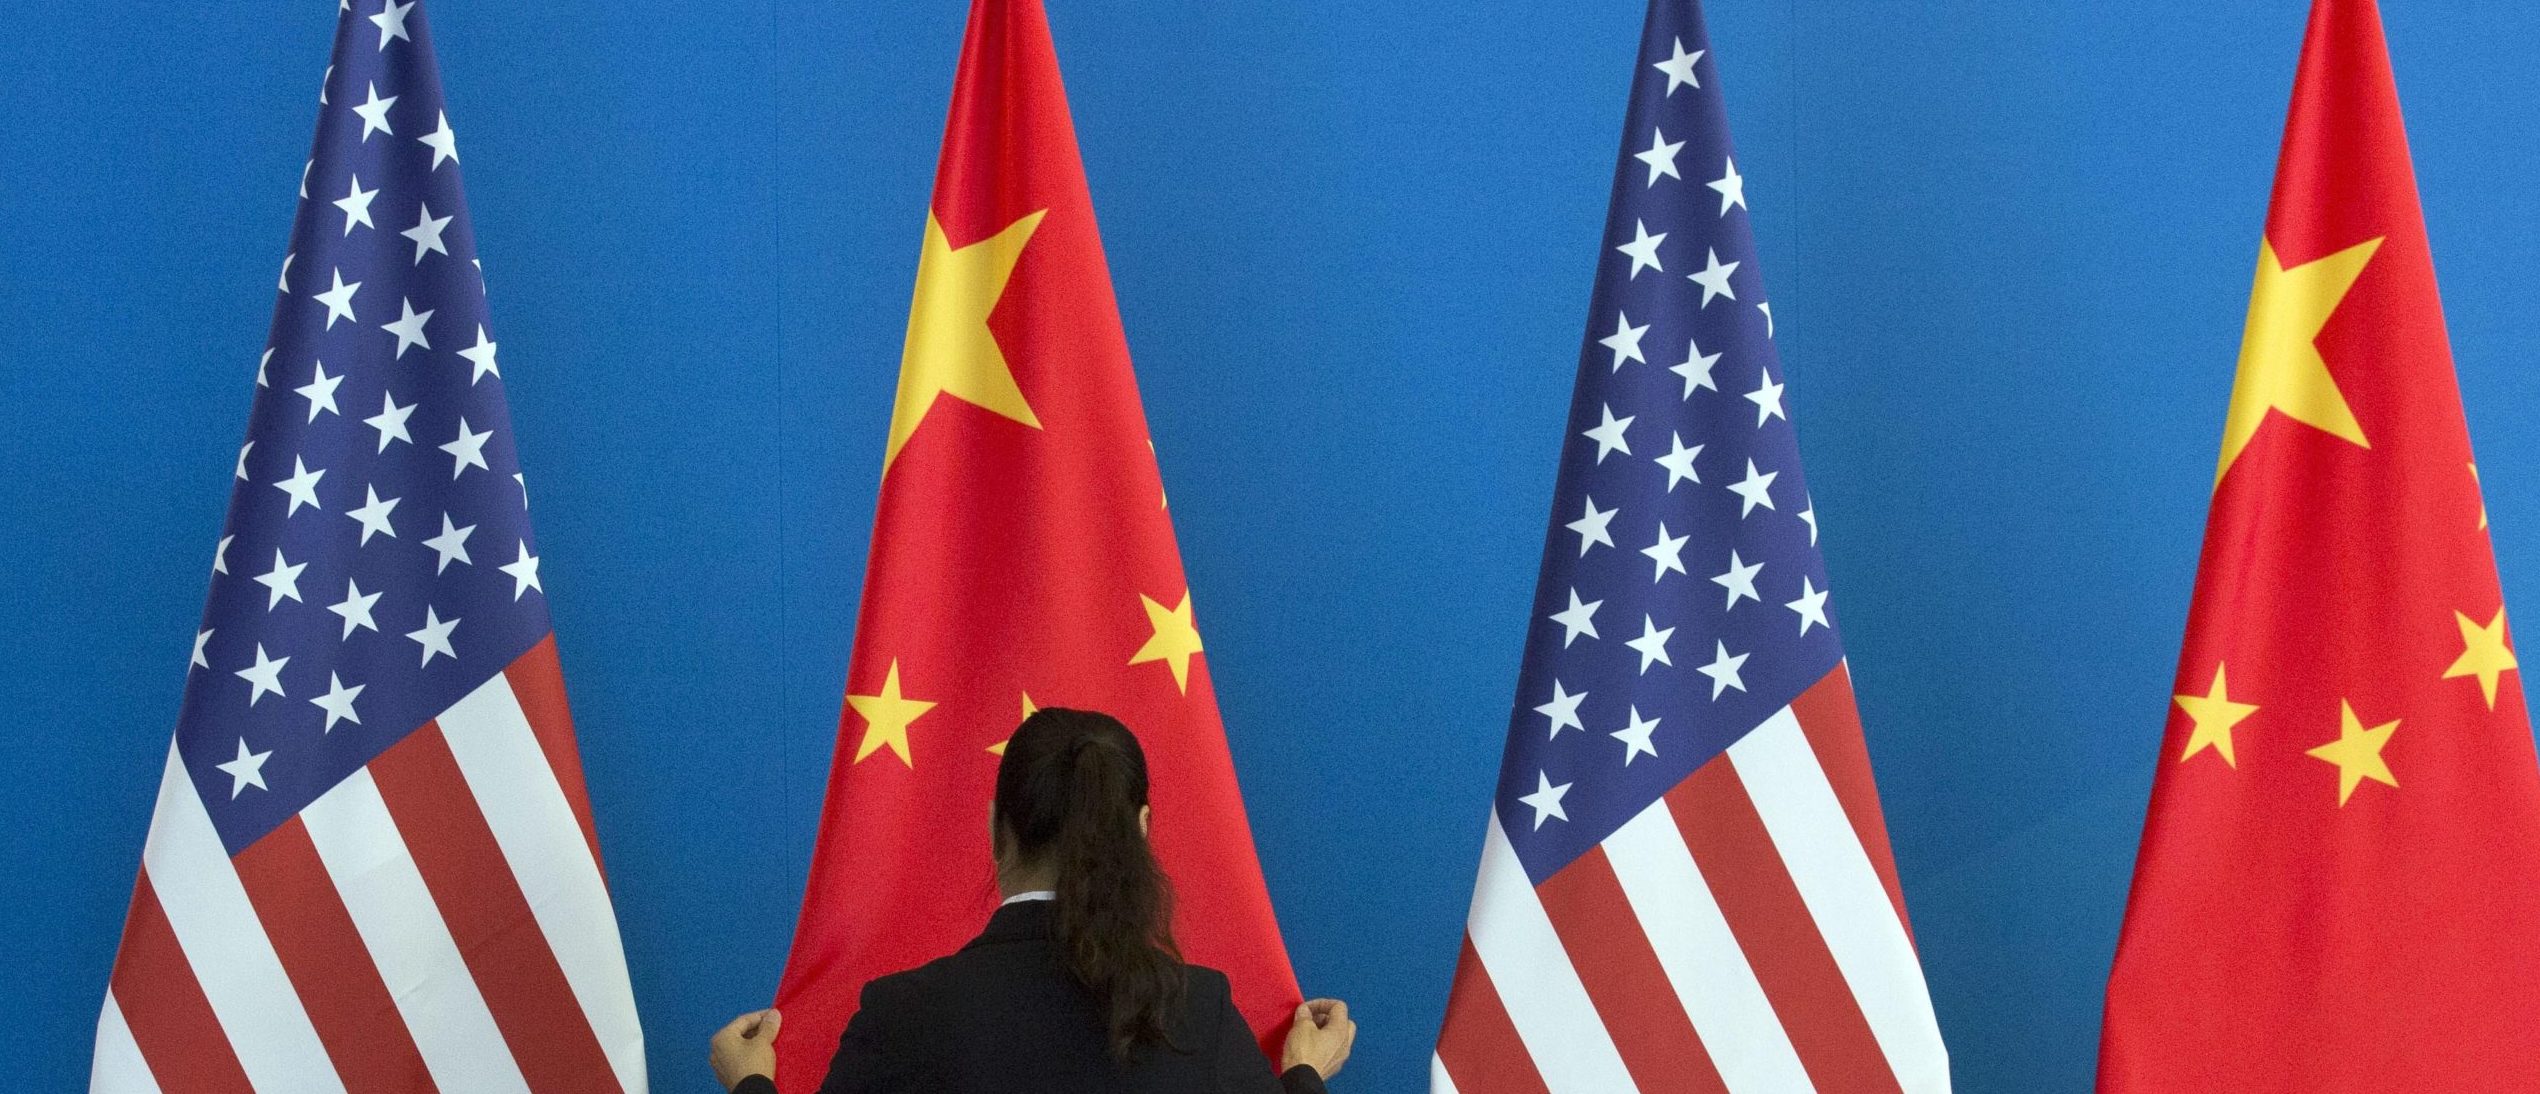 A Chinese woman adjusts a Chinese flag near US flags before the start of a Strategic Dialogue expanded meeting between China and the US during the US-China Strategic and Economic Dialogue held at the Diaoyutai State Guesthouse in Beijing on July 10, 2014. (NG HAN GUAN/AFP via Getty Images)